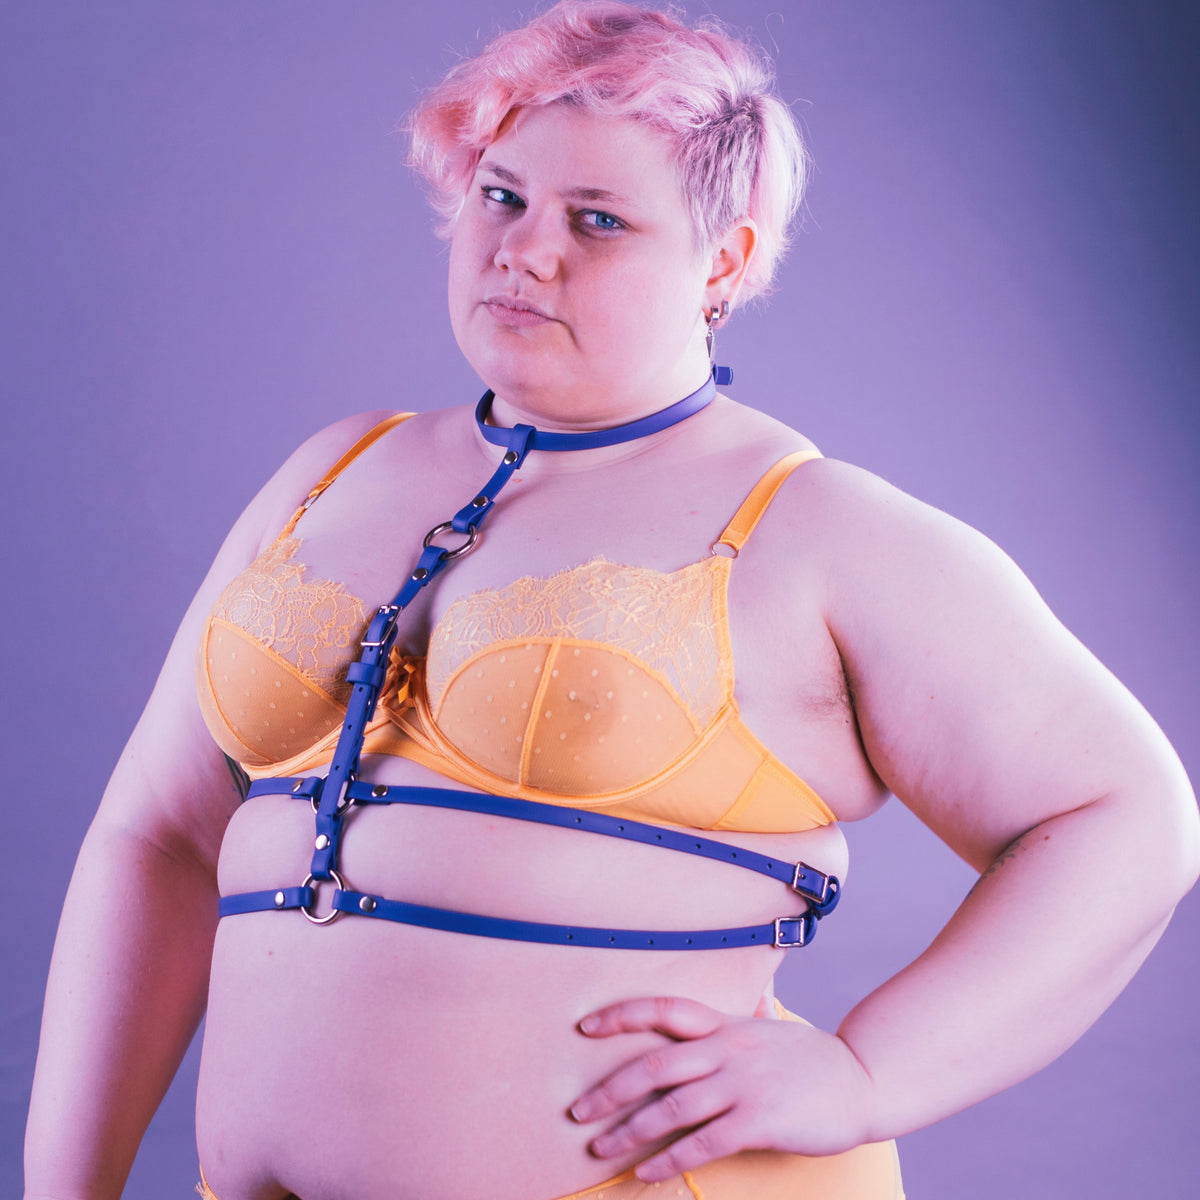 Woman wearing yellow lingerie and a purple harness.